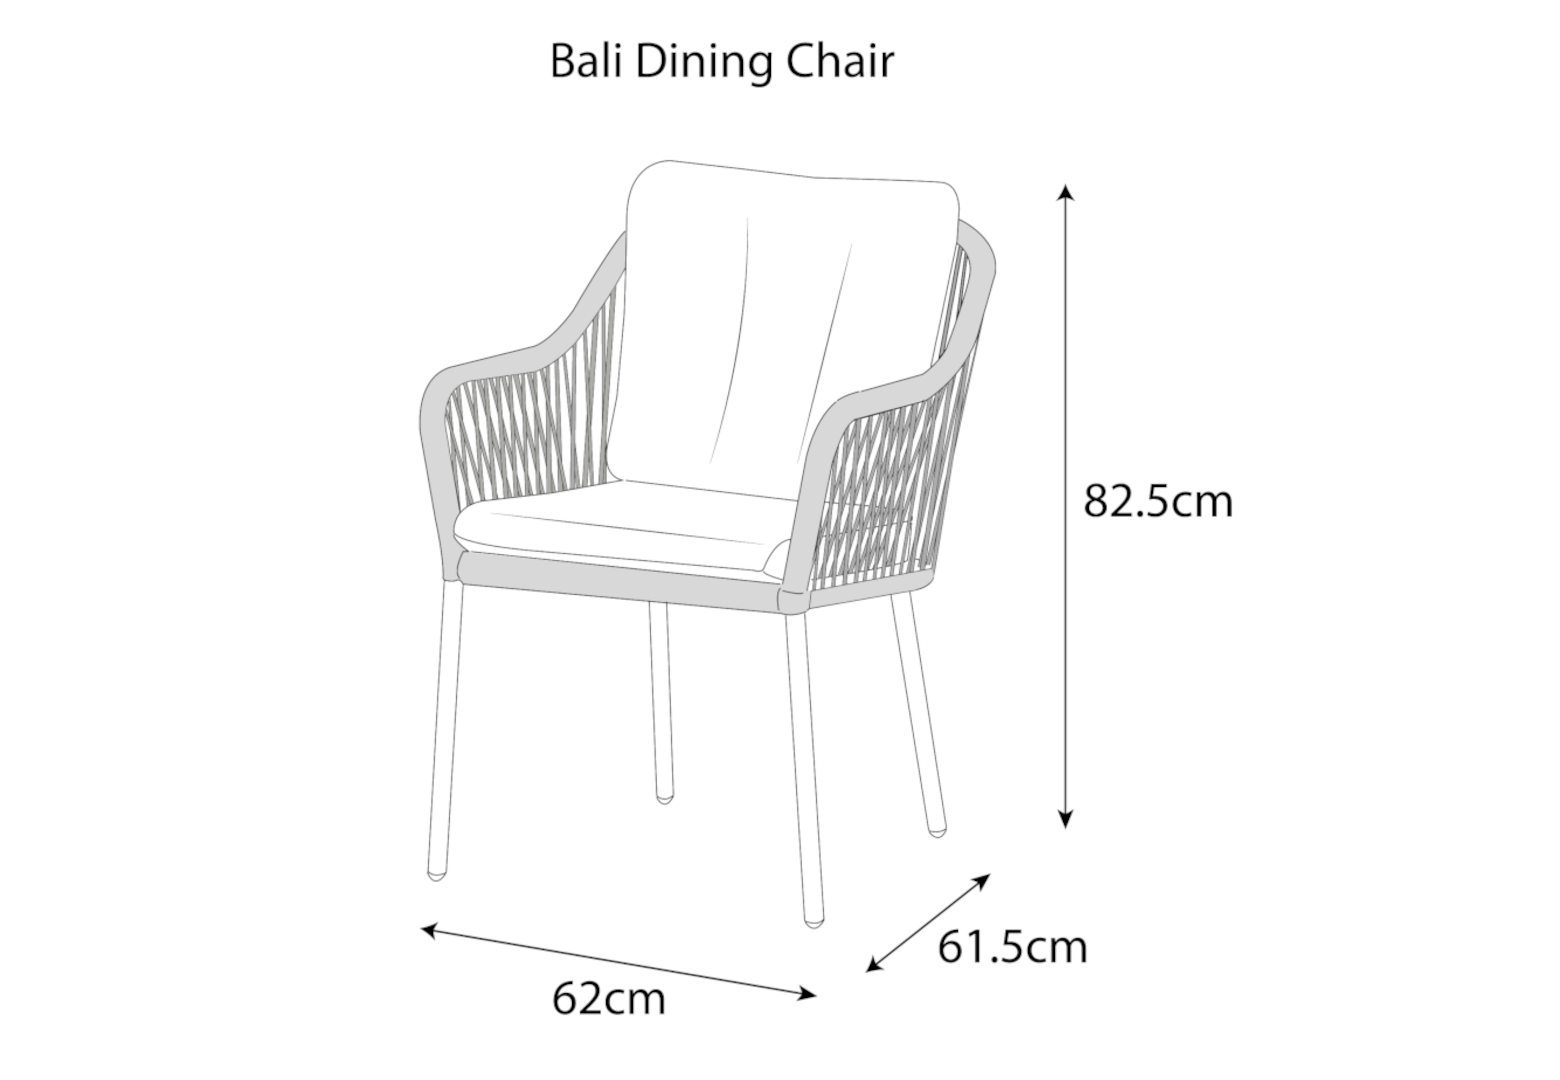 Dining Chair - dimensions image